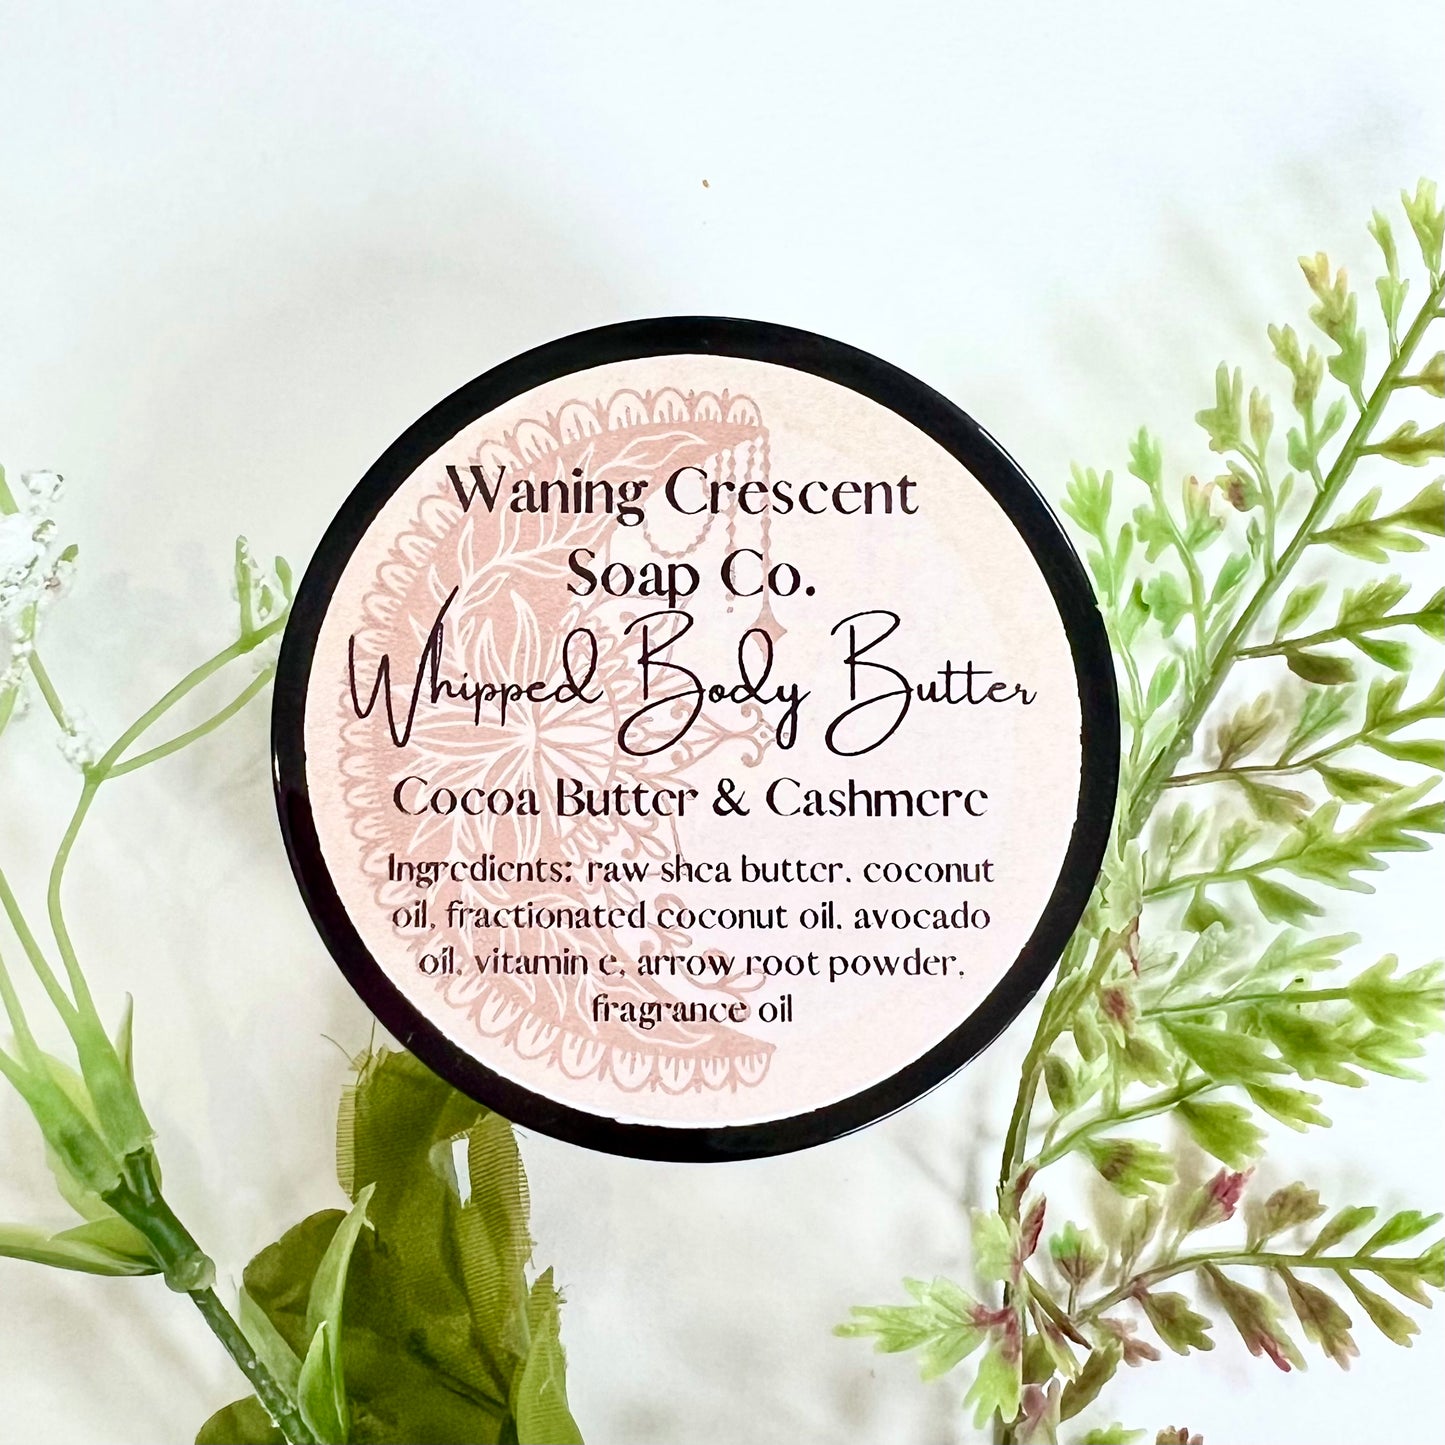 Cocoa & Cashmere Whipped Body Butter